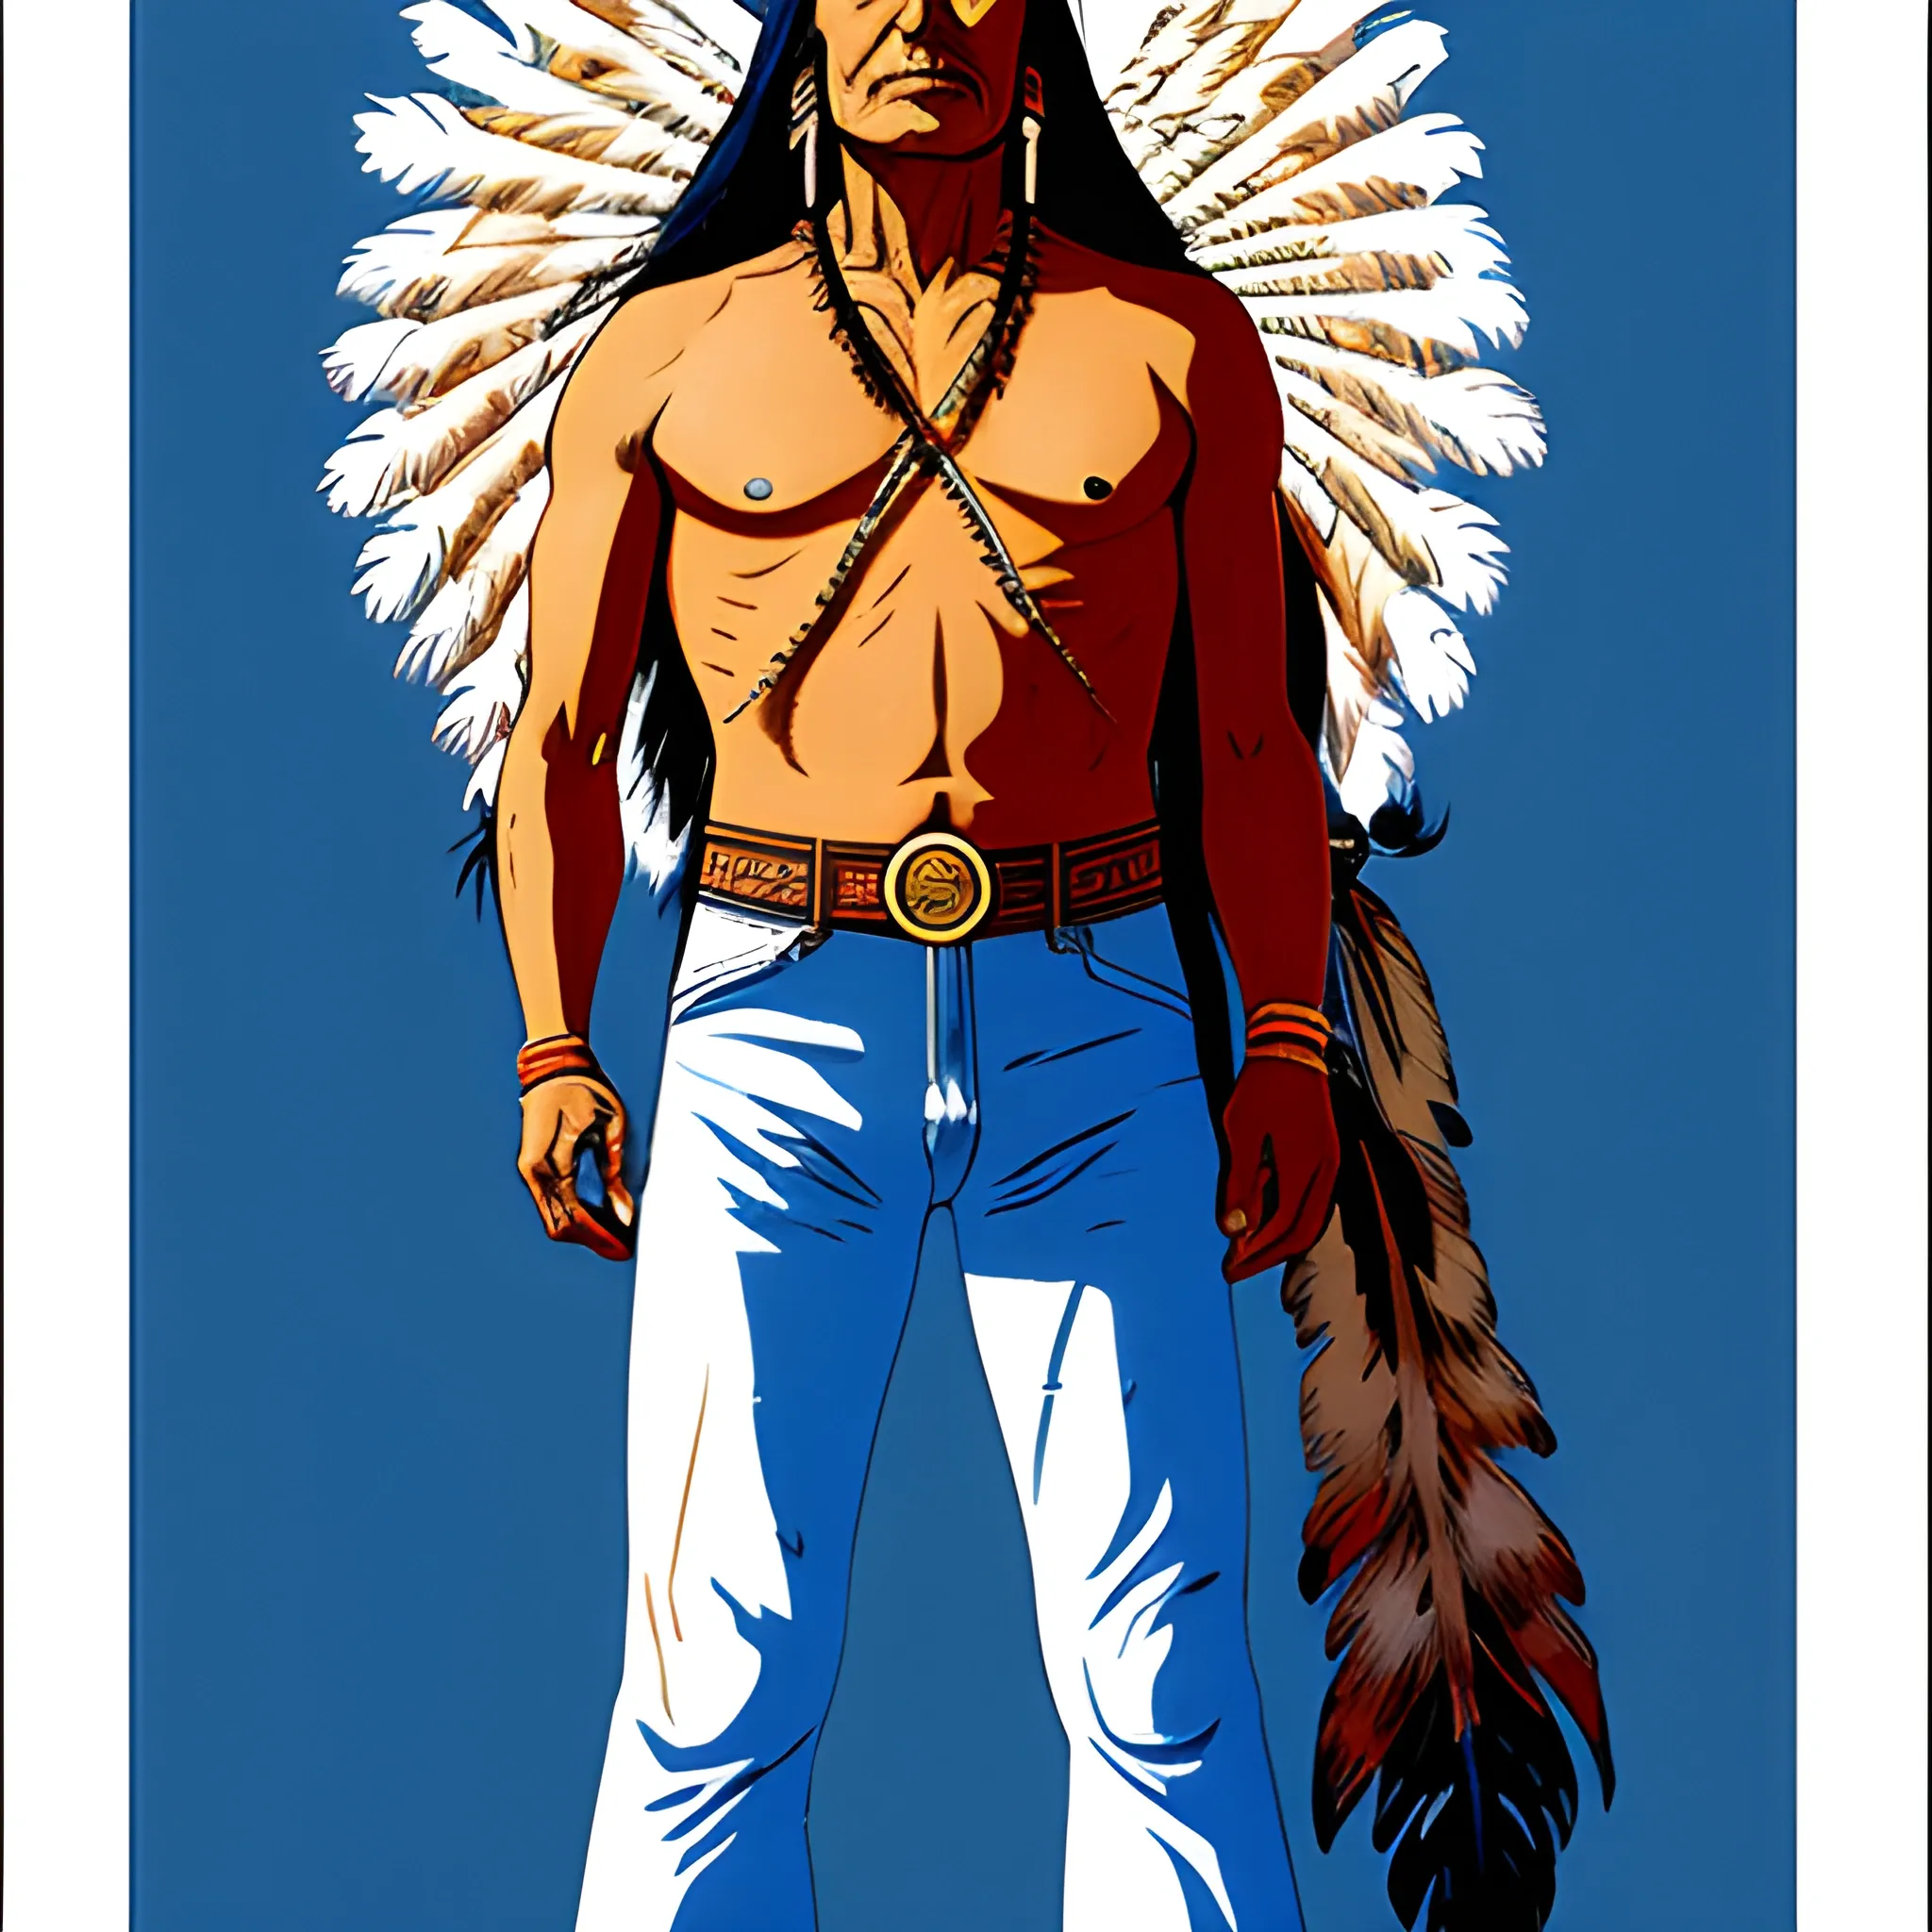 Native American chief, Croatan Indian, with blue eyes looking off in the distances, full body, Drawn in Jean Giraud's art style